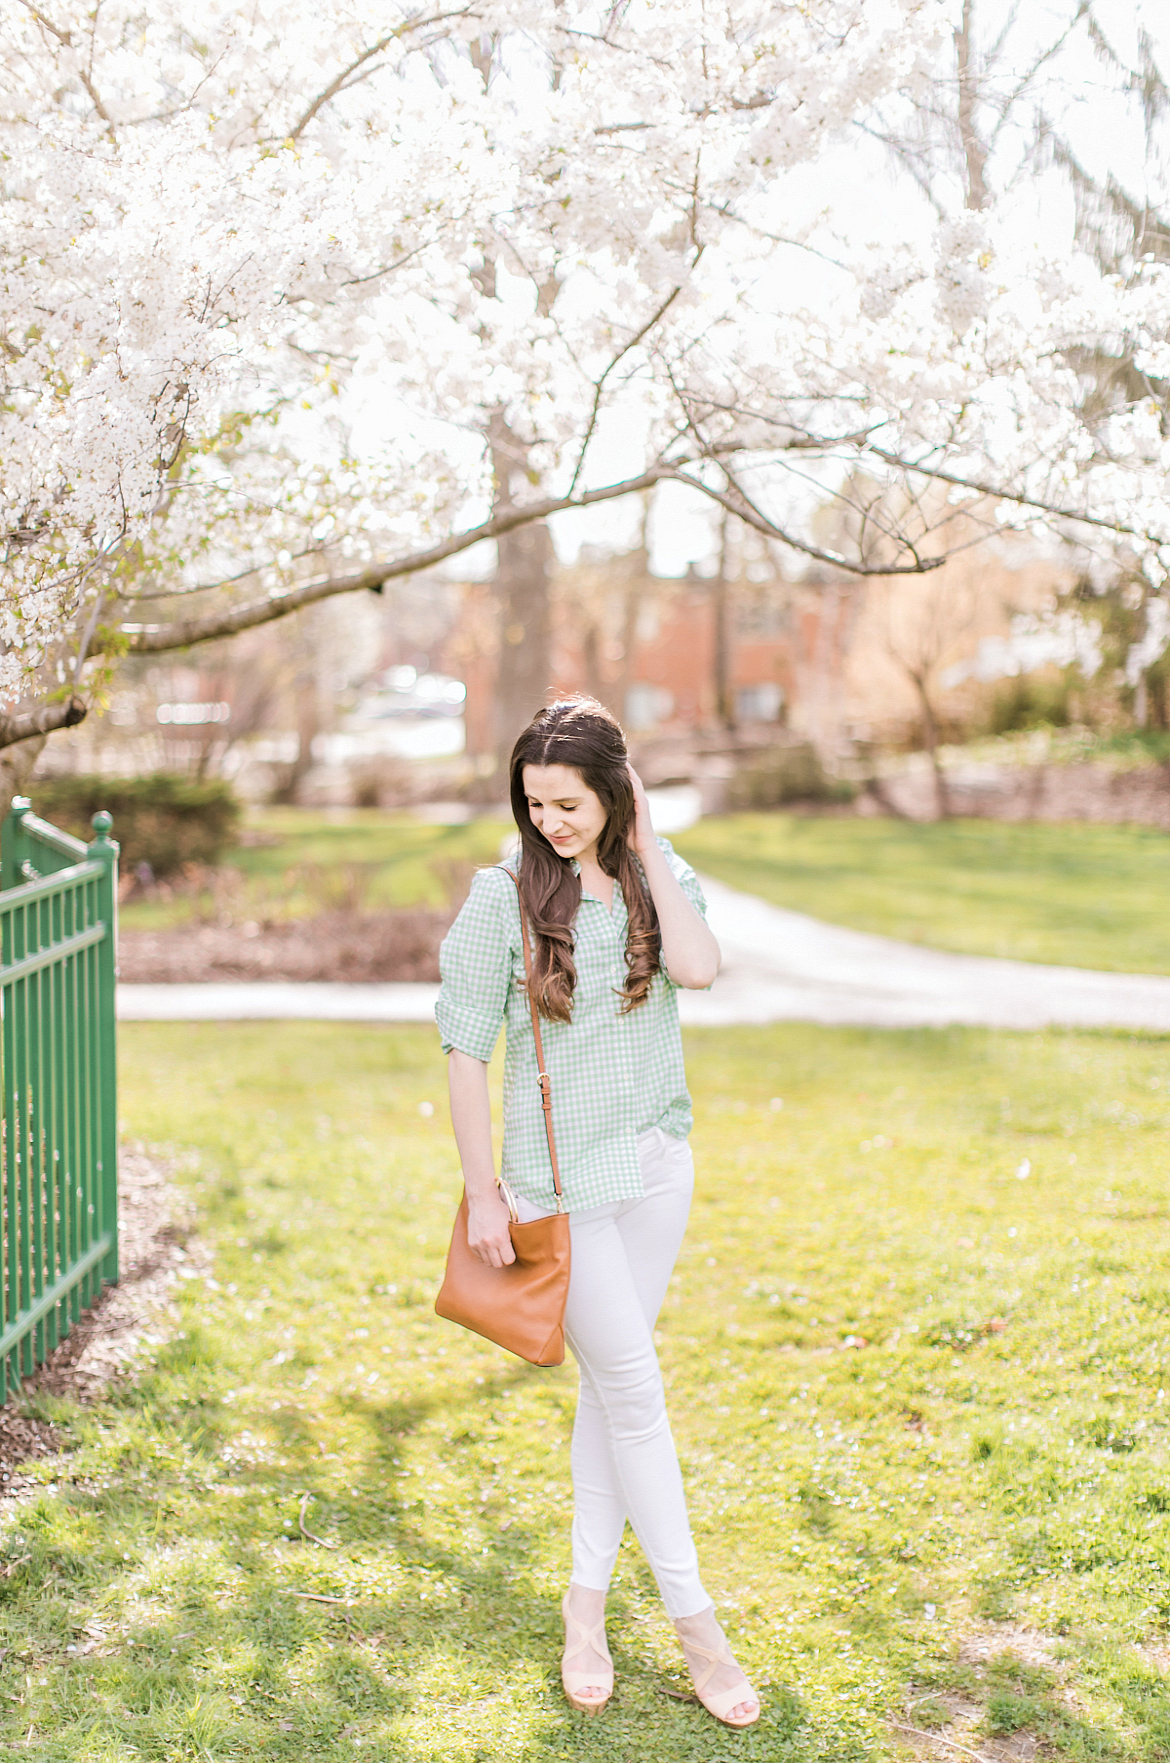 Pastel Lookbook: Spring Style Picks from Kohl's by southern fashion blogger Stephanie Ziajka from Diary of a Debutante, top kohl's picks, spring wardrobe essentials, cute spring clothes for women, cute spring outfits, cute spring outfits for women, Chaps No-Iron Green Gingham Shirt, Levi's 711 White Ankle Skinny Jeans, LC Lauren Conrad Ring Convertible Crossbody Bag 